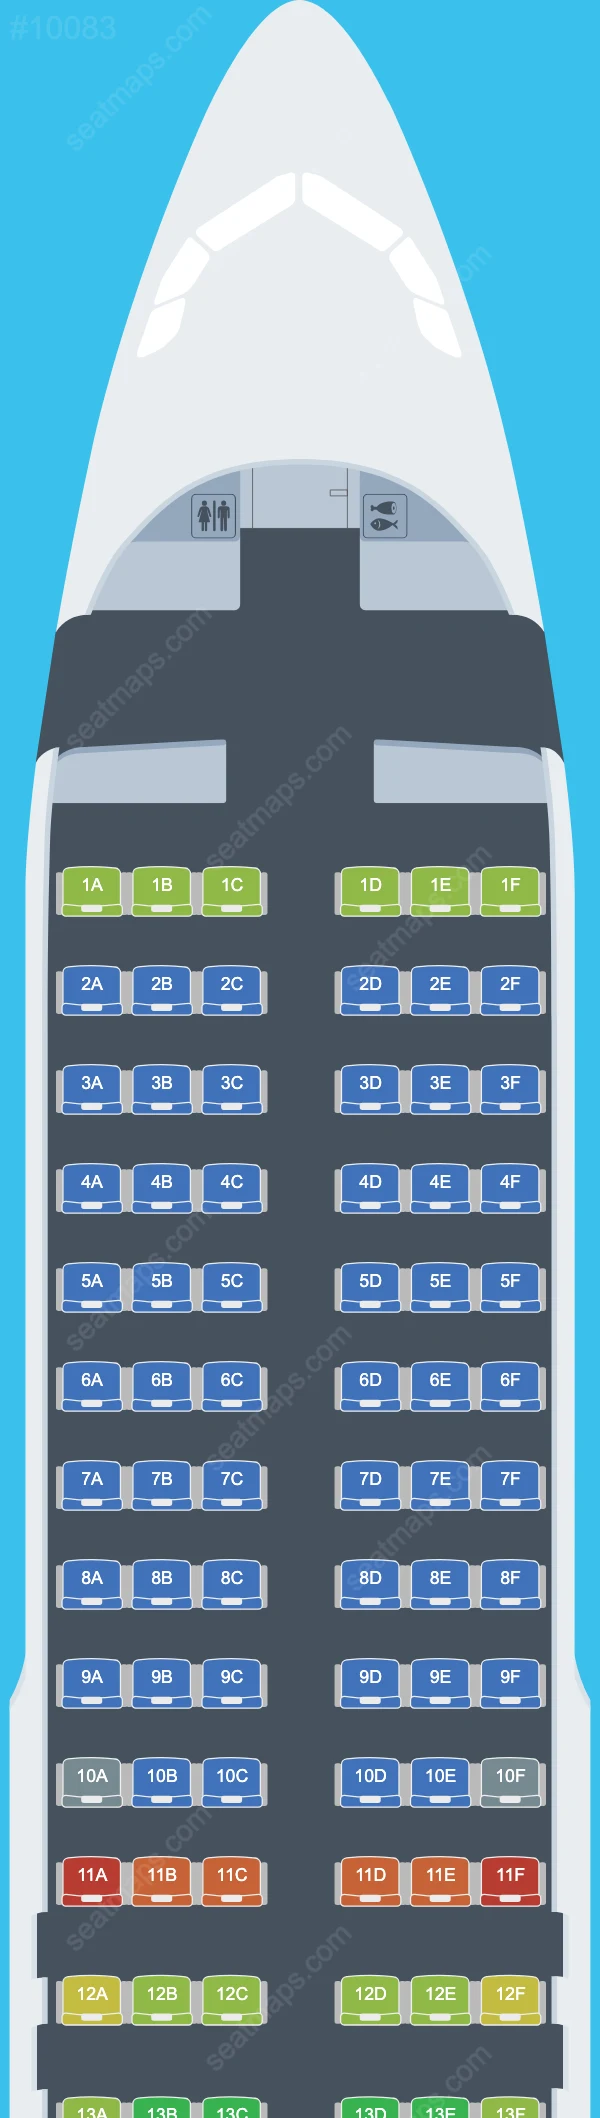 Air Sial Limited Airbus A320 Seat Maps A320-200